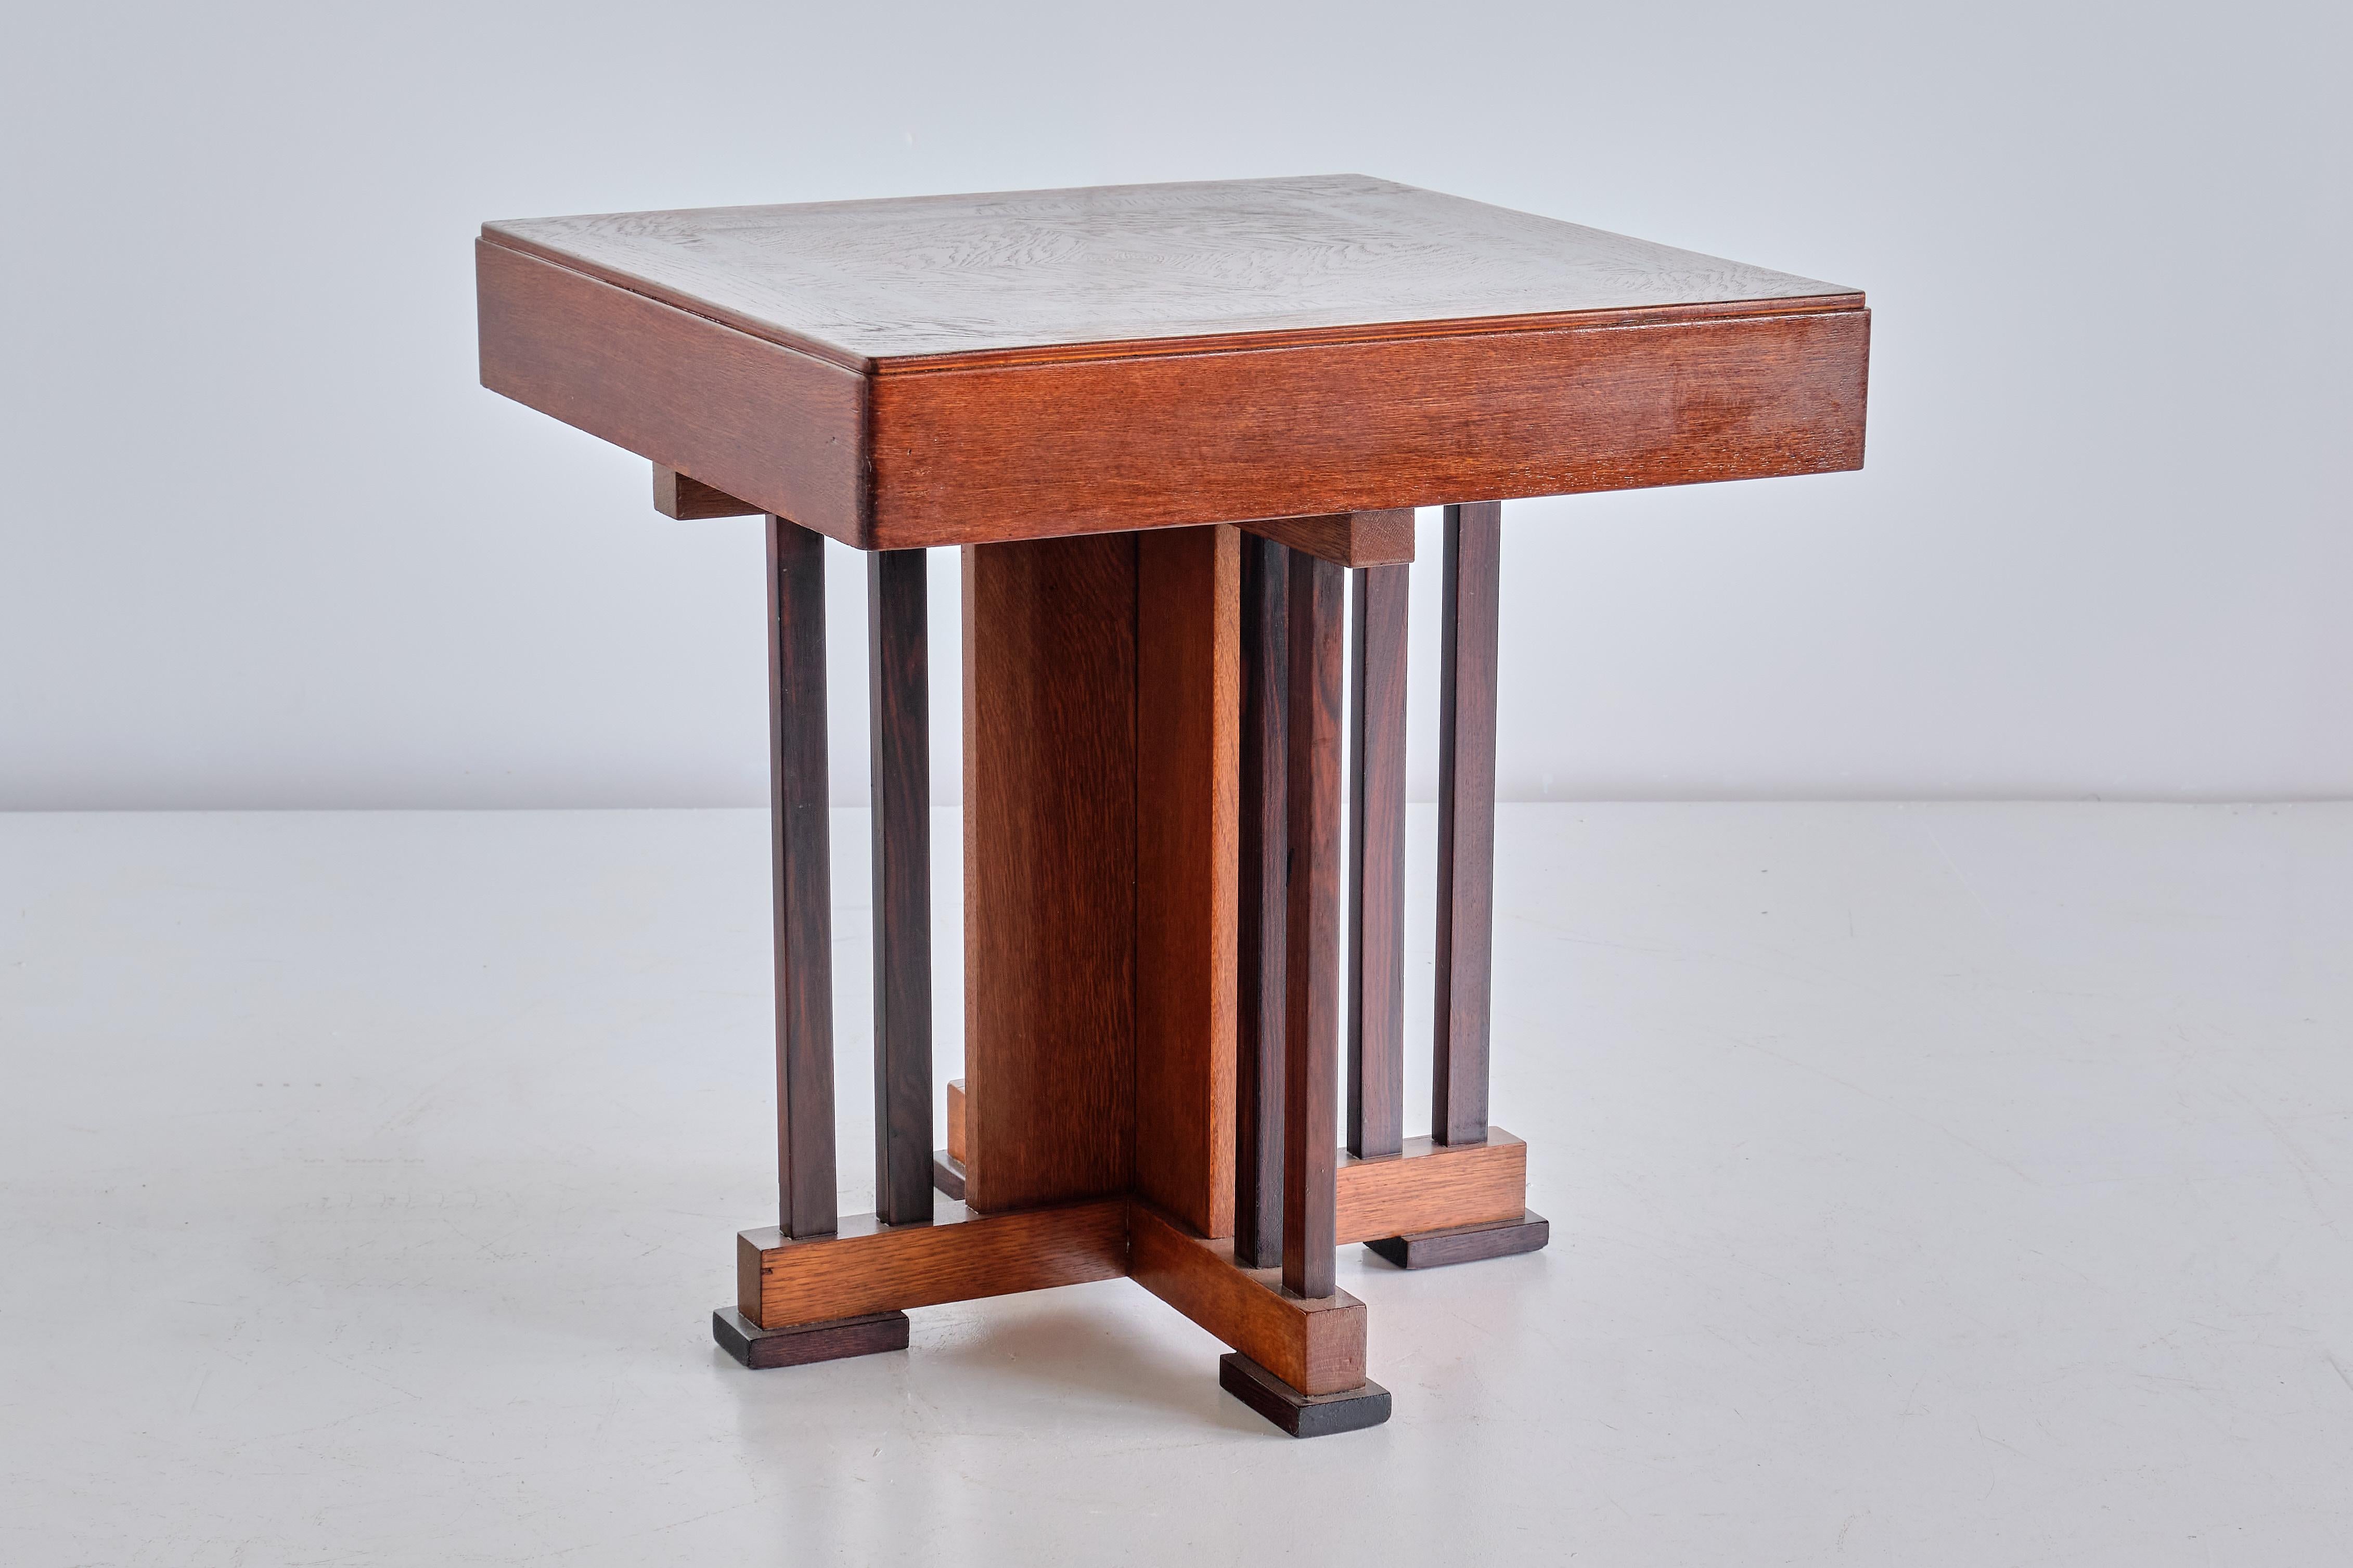 This rare side/occasional table was designed by P.E.L. Izeren and produced by the Dutch company Genneper Molen in 1930. The frame and top are made of solid and veneered oak, with the eight supporting column slats and the rectangular feet in solid